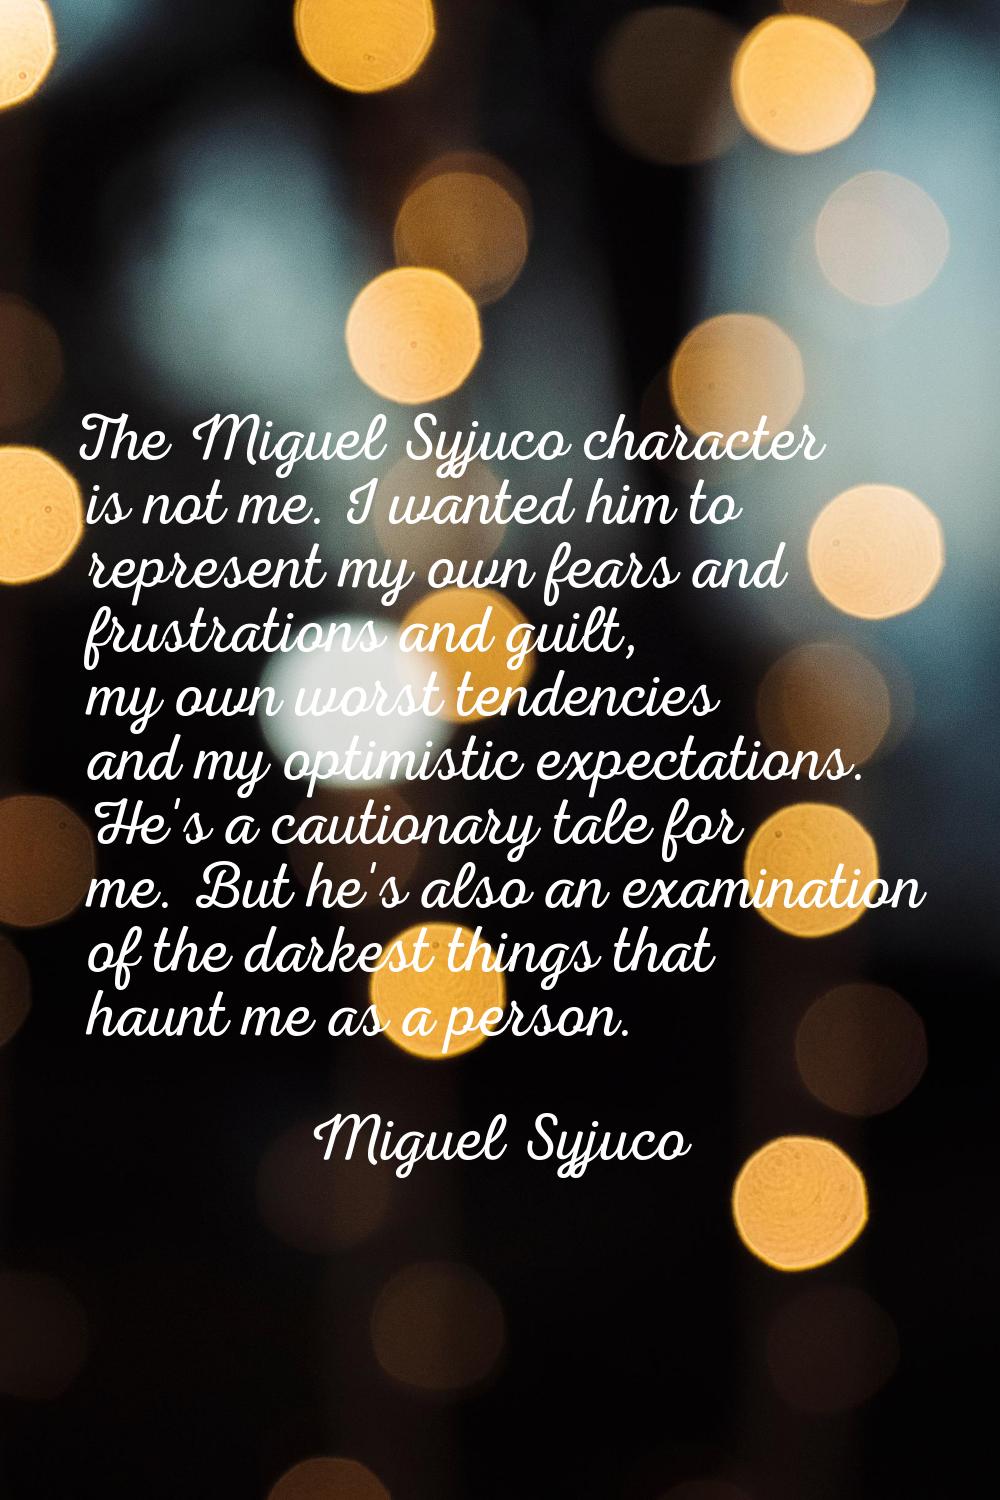 The Miguel Syjuco character is not me. I wanted him to represent my own fears and frustrations and 